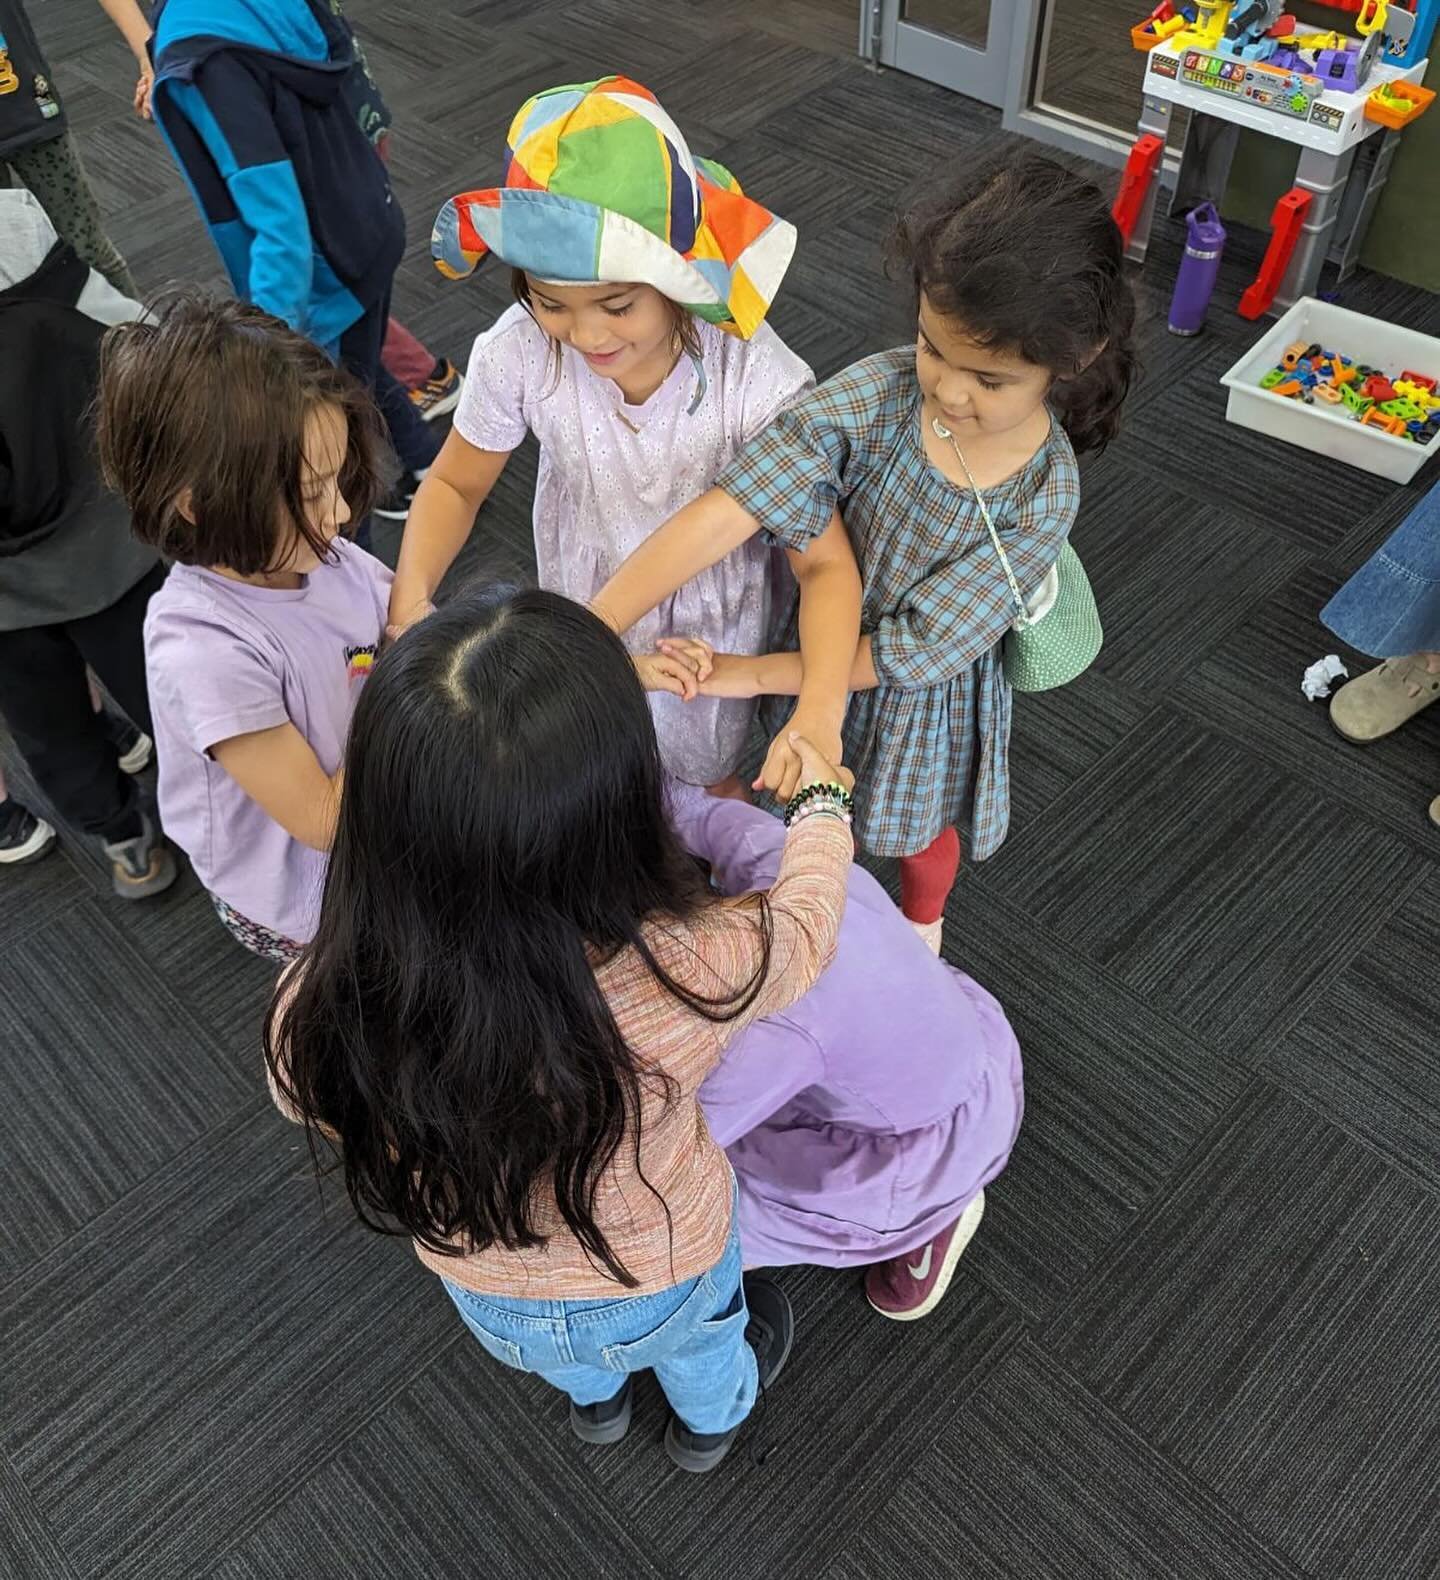 The grade 1/2s are currently focusing on respectful relationships. 

Untangling themselves through teamwork🤩

&nbsp;#FNPS #fitzroynorthprimary #fitzroynorthprimaryschool #fitzroynorth #primaryschool #teamwork #grade1 #grade2 #resprectful #relationsh